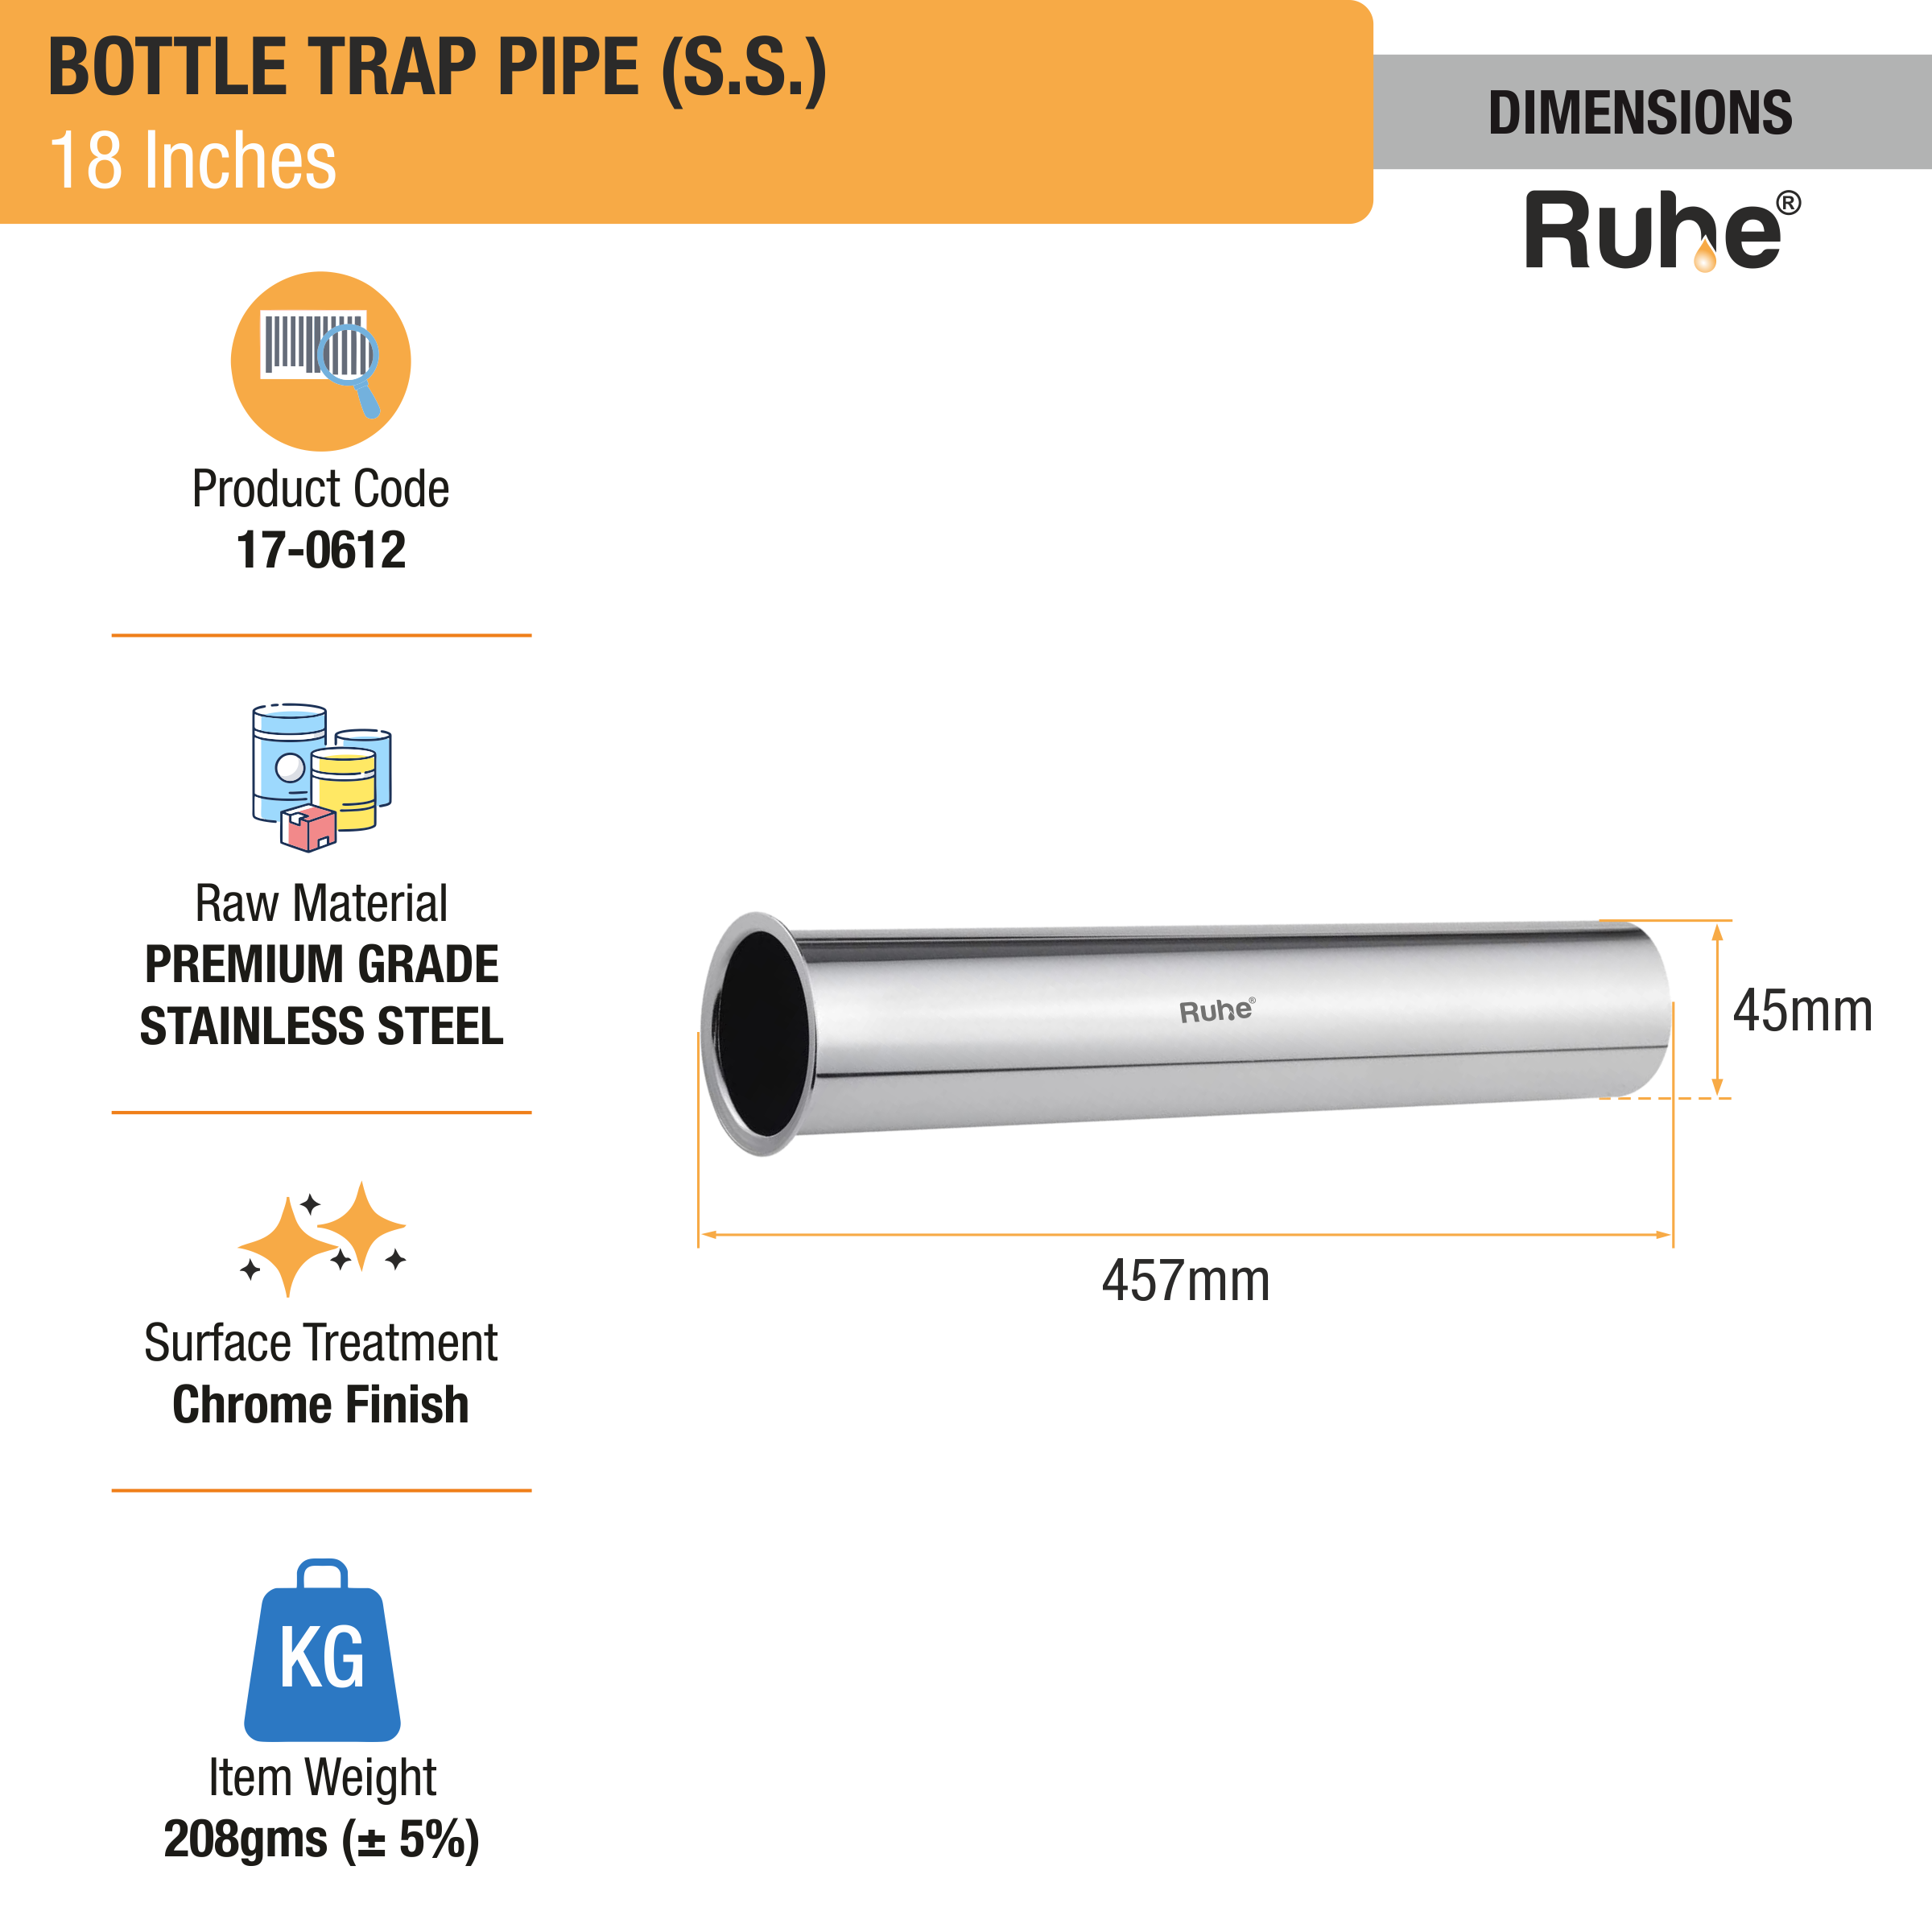 Bottle Trap Stainless Steel Pipe (18 Inches) dimensions and size